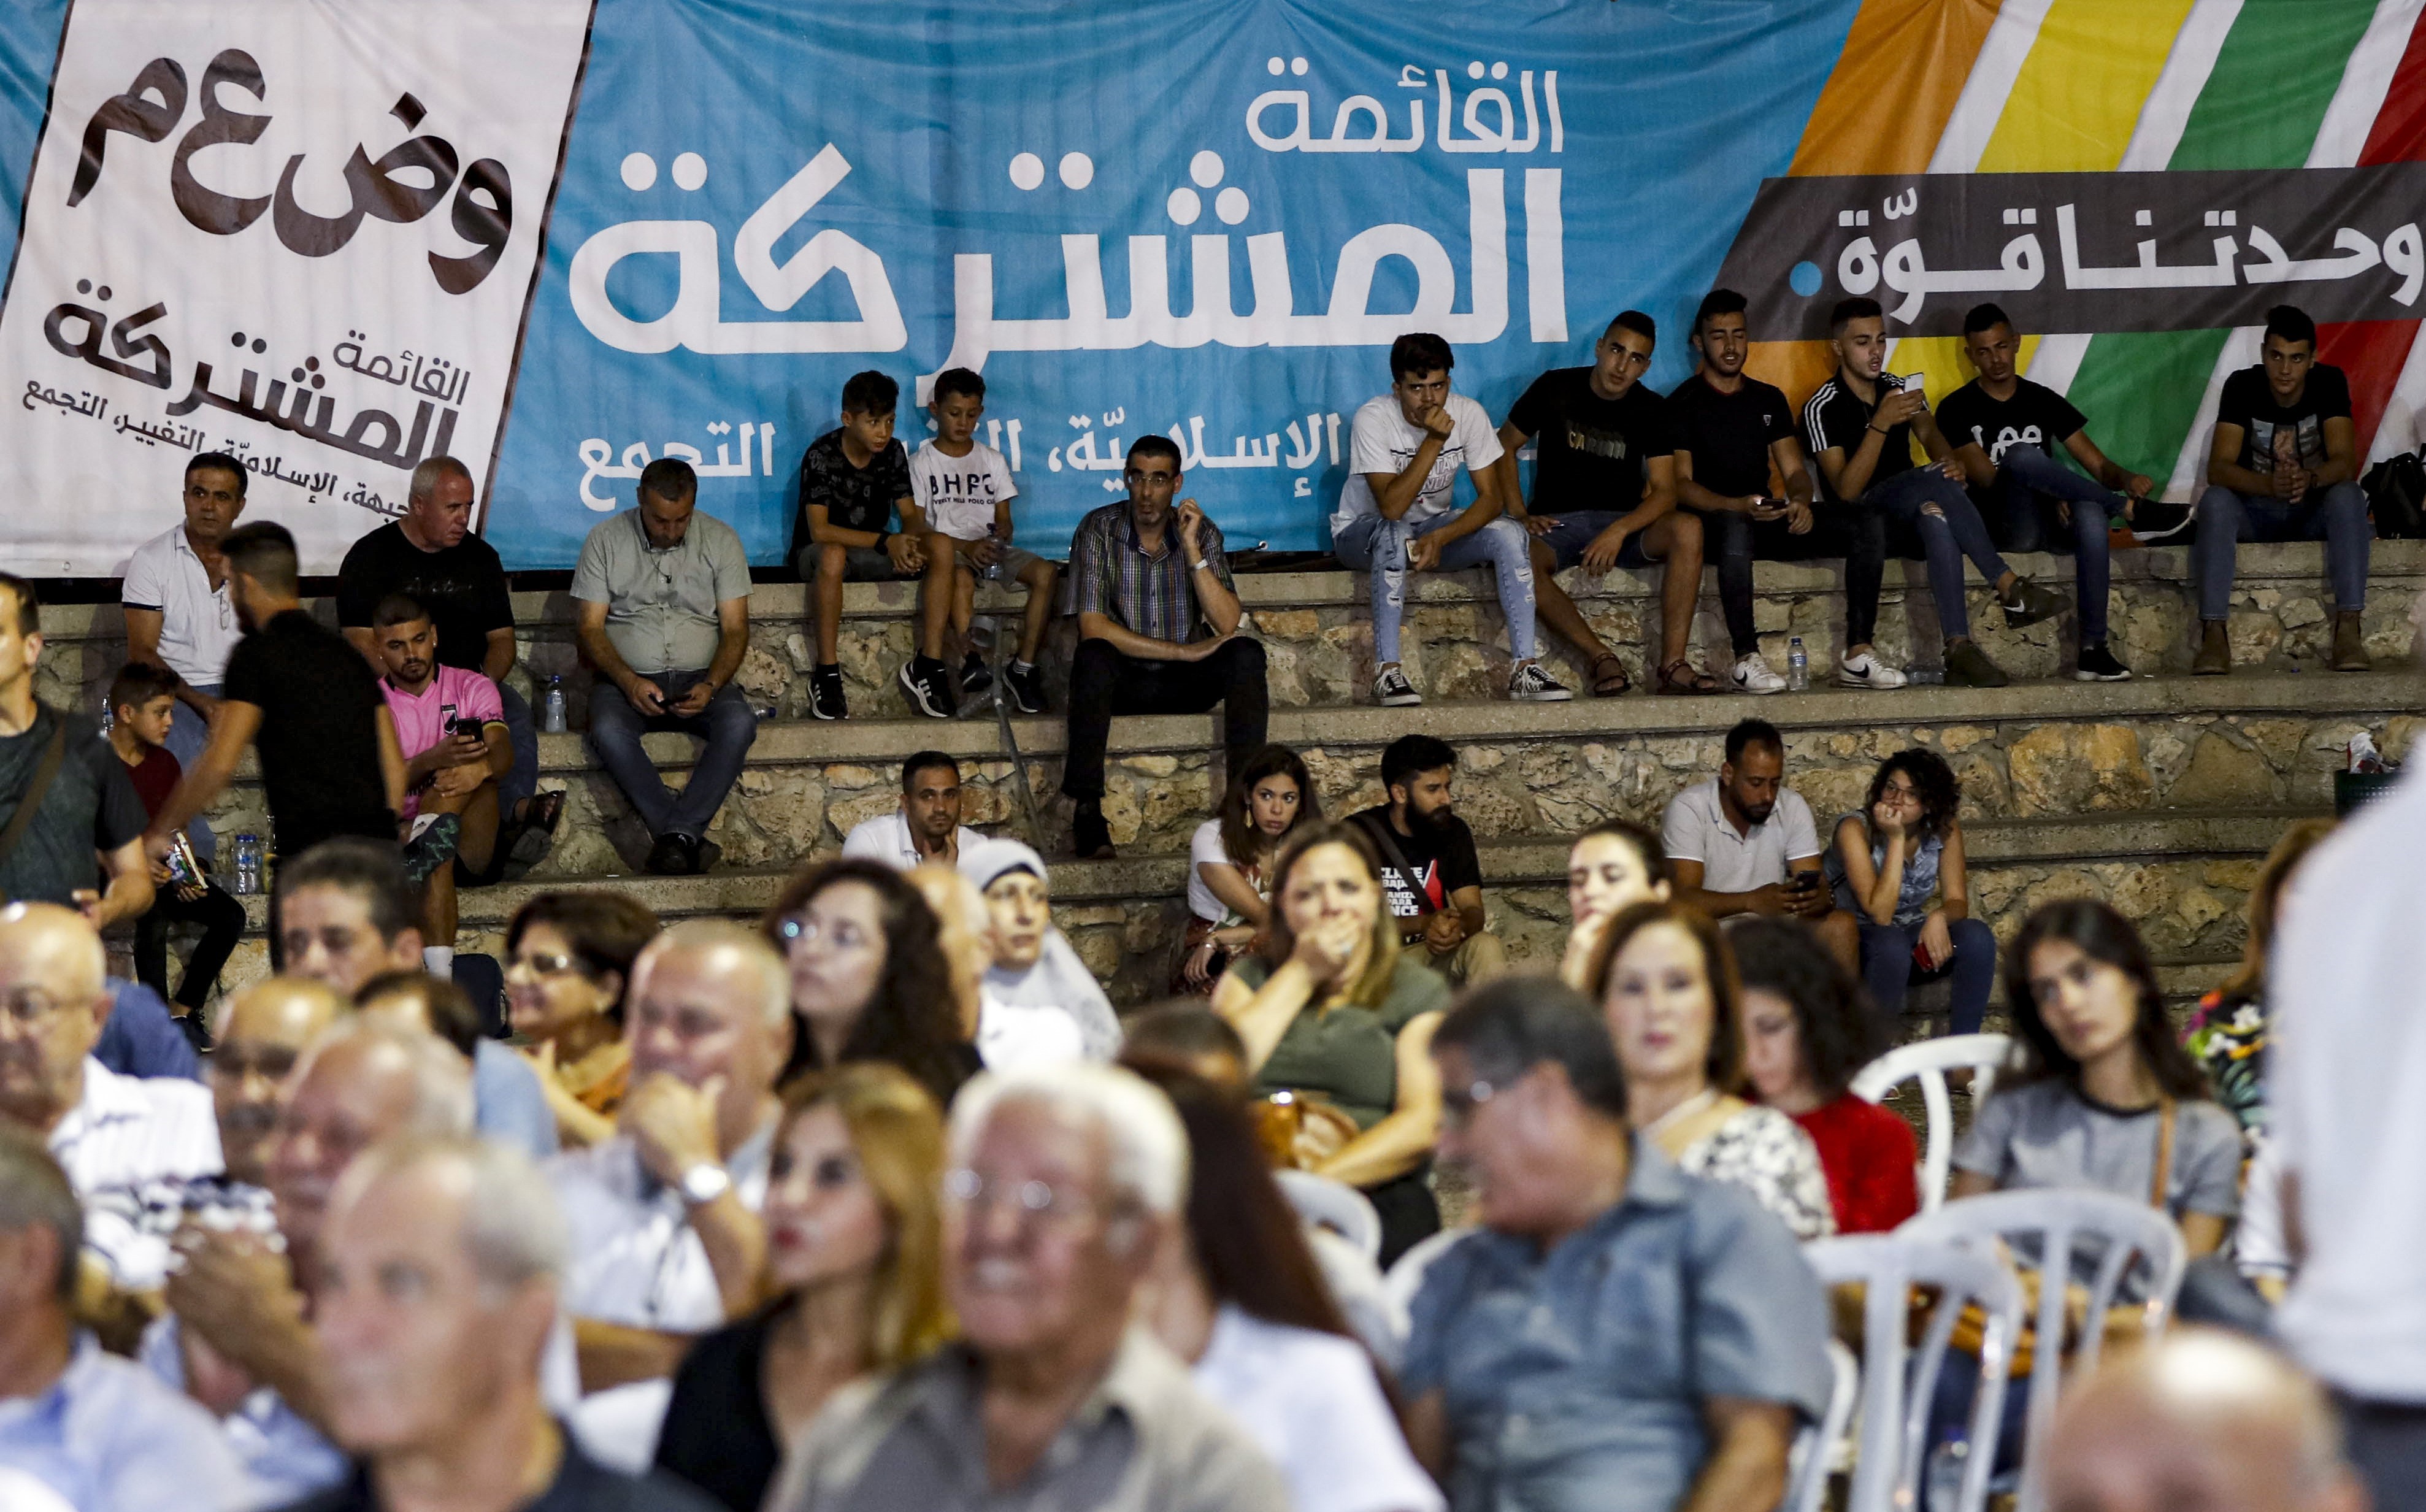  Supporters of the Joint List Israeli Arab political alliance attend a campaign rally ahead of upcoming September parliamentary elections, in the Arab town of Kafr Yasif in northern Israel on 23 August (AFP)